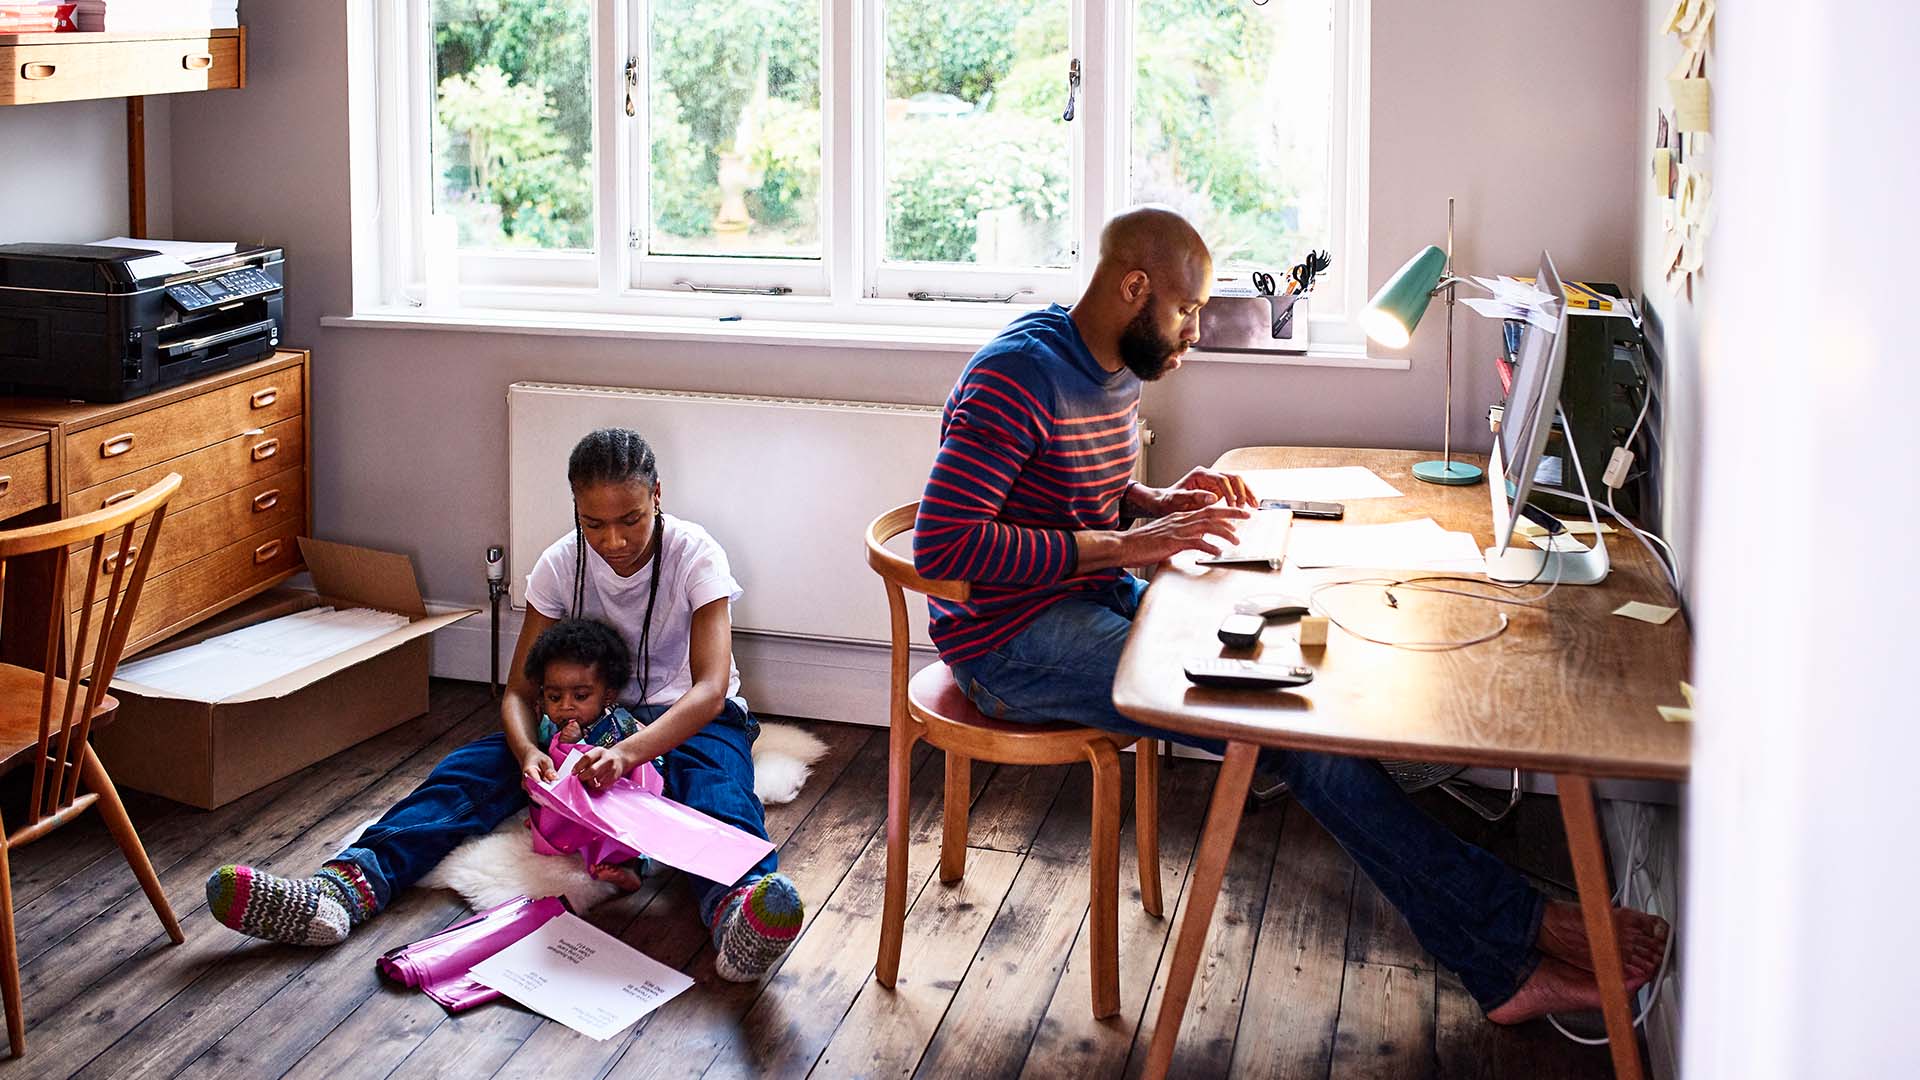 Dad sits at desk working while mom helps small child get ready for school